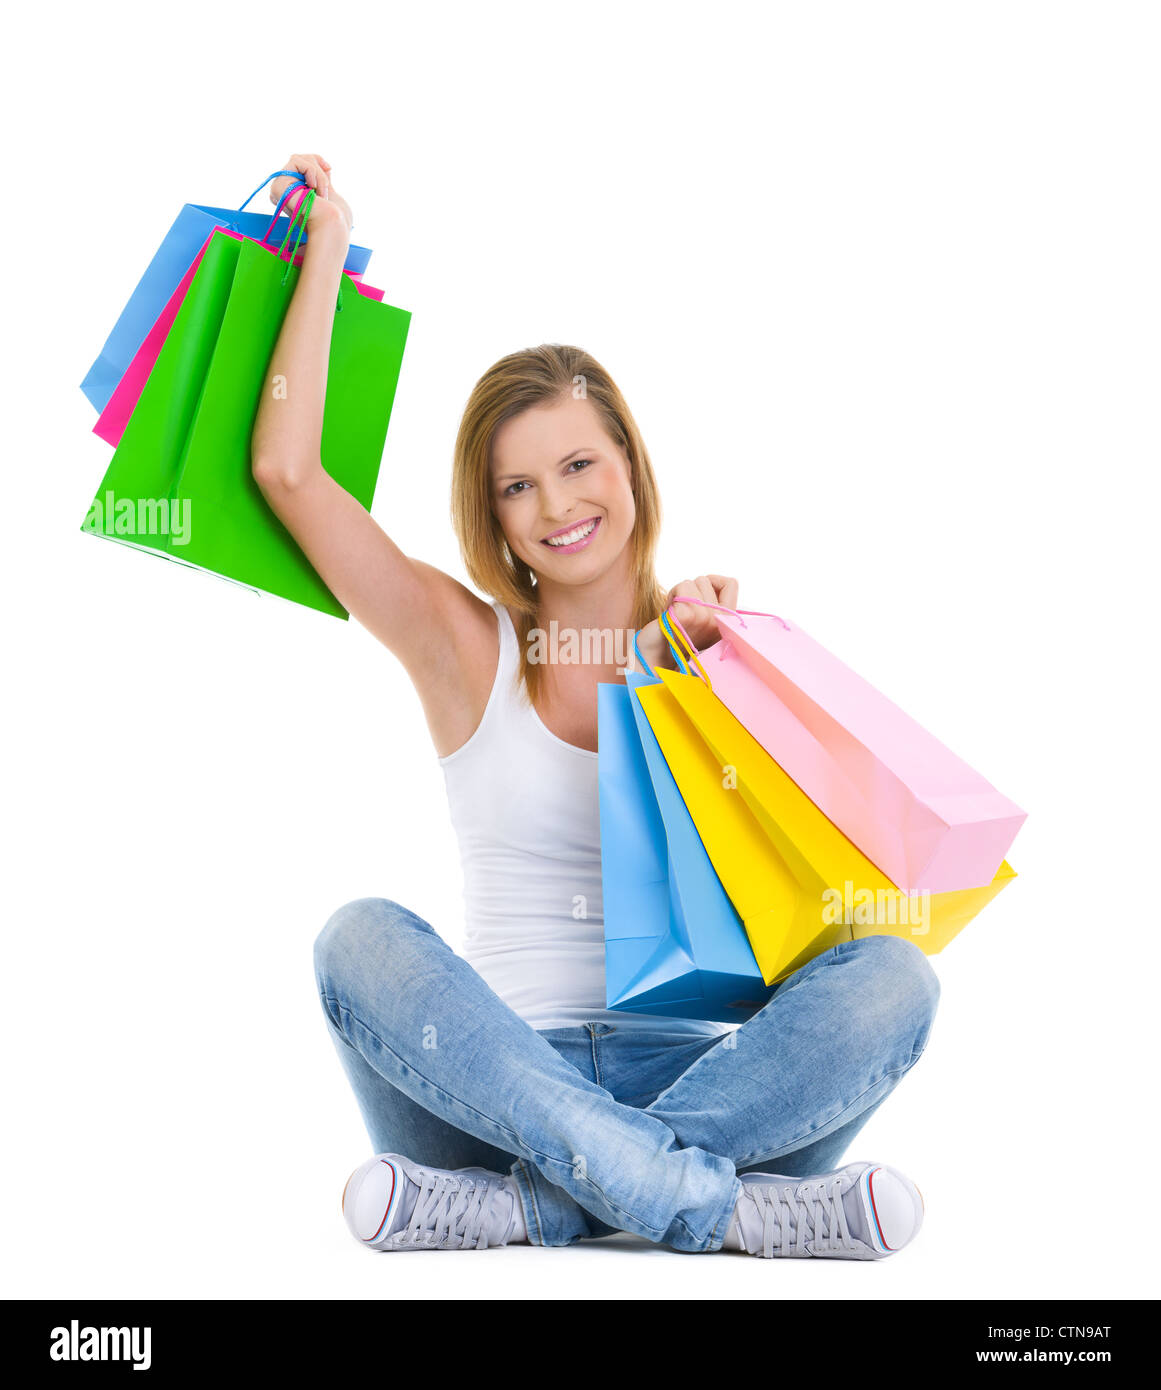 Full length portrait of happy teenage girl sitting with shopping bags Stock Photo